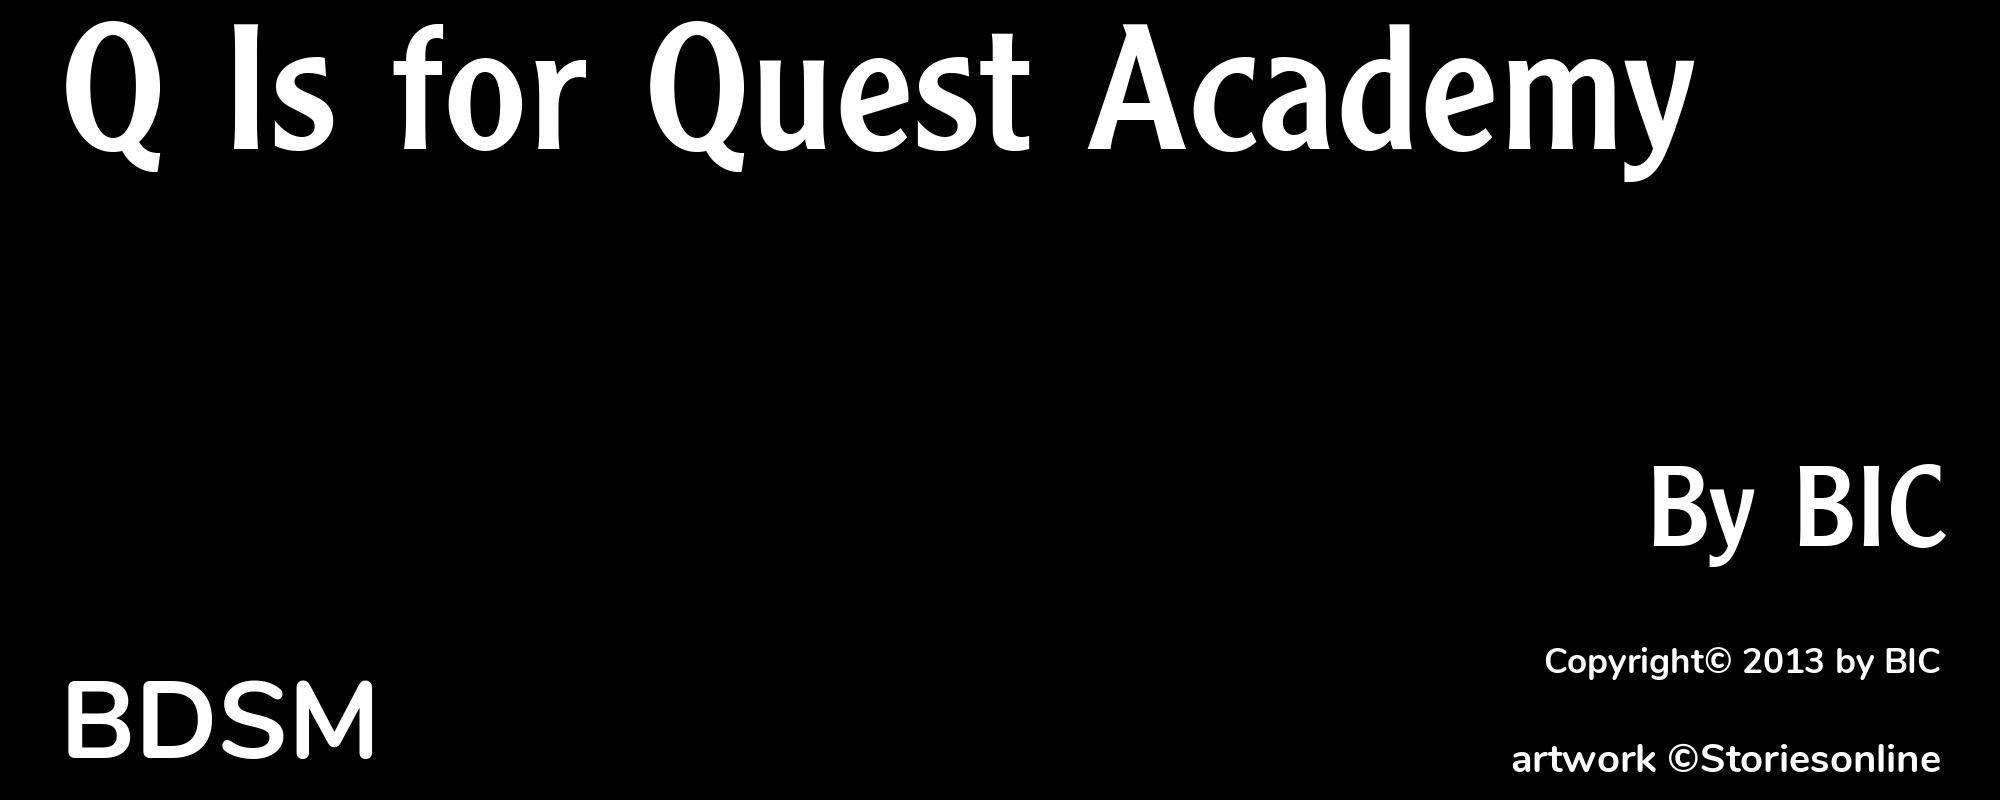 Q Is for Quest Academy - Cover